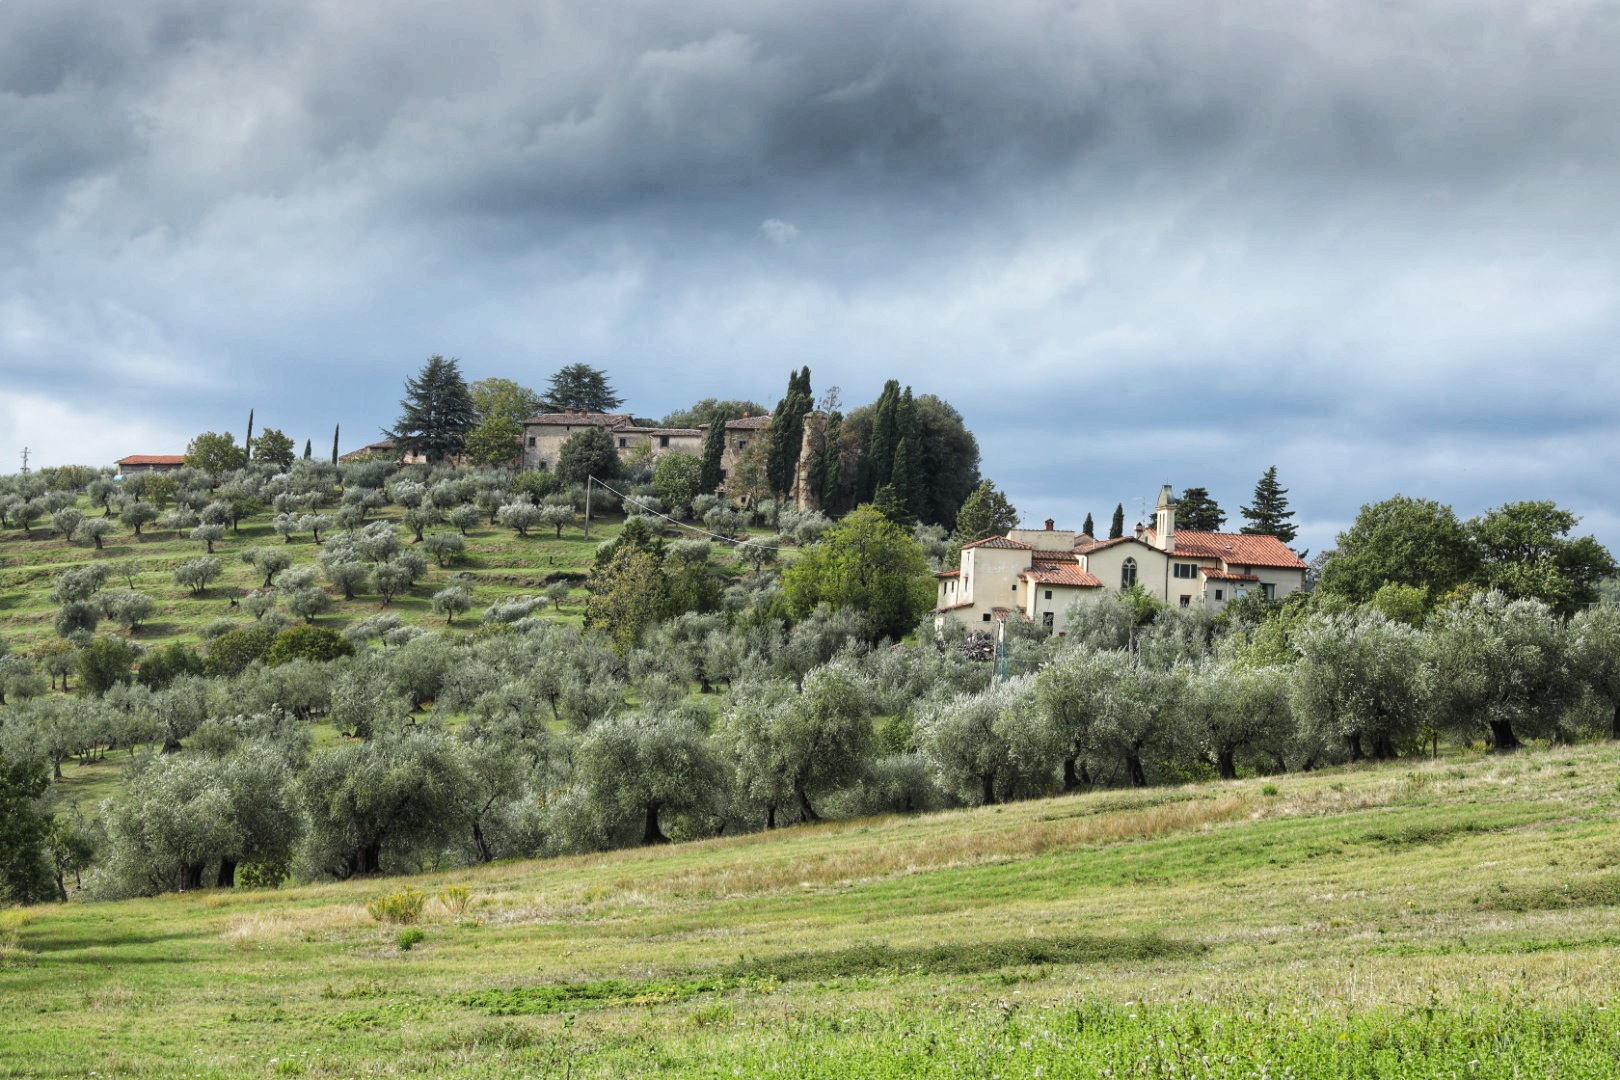 Hills and Agriturismo near Pagiano, Tuscany, Italy